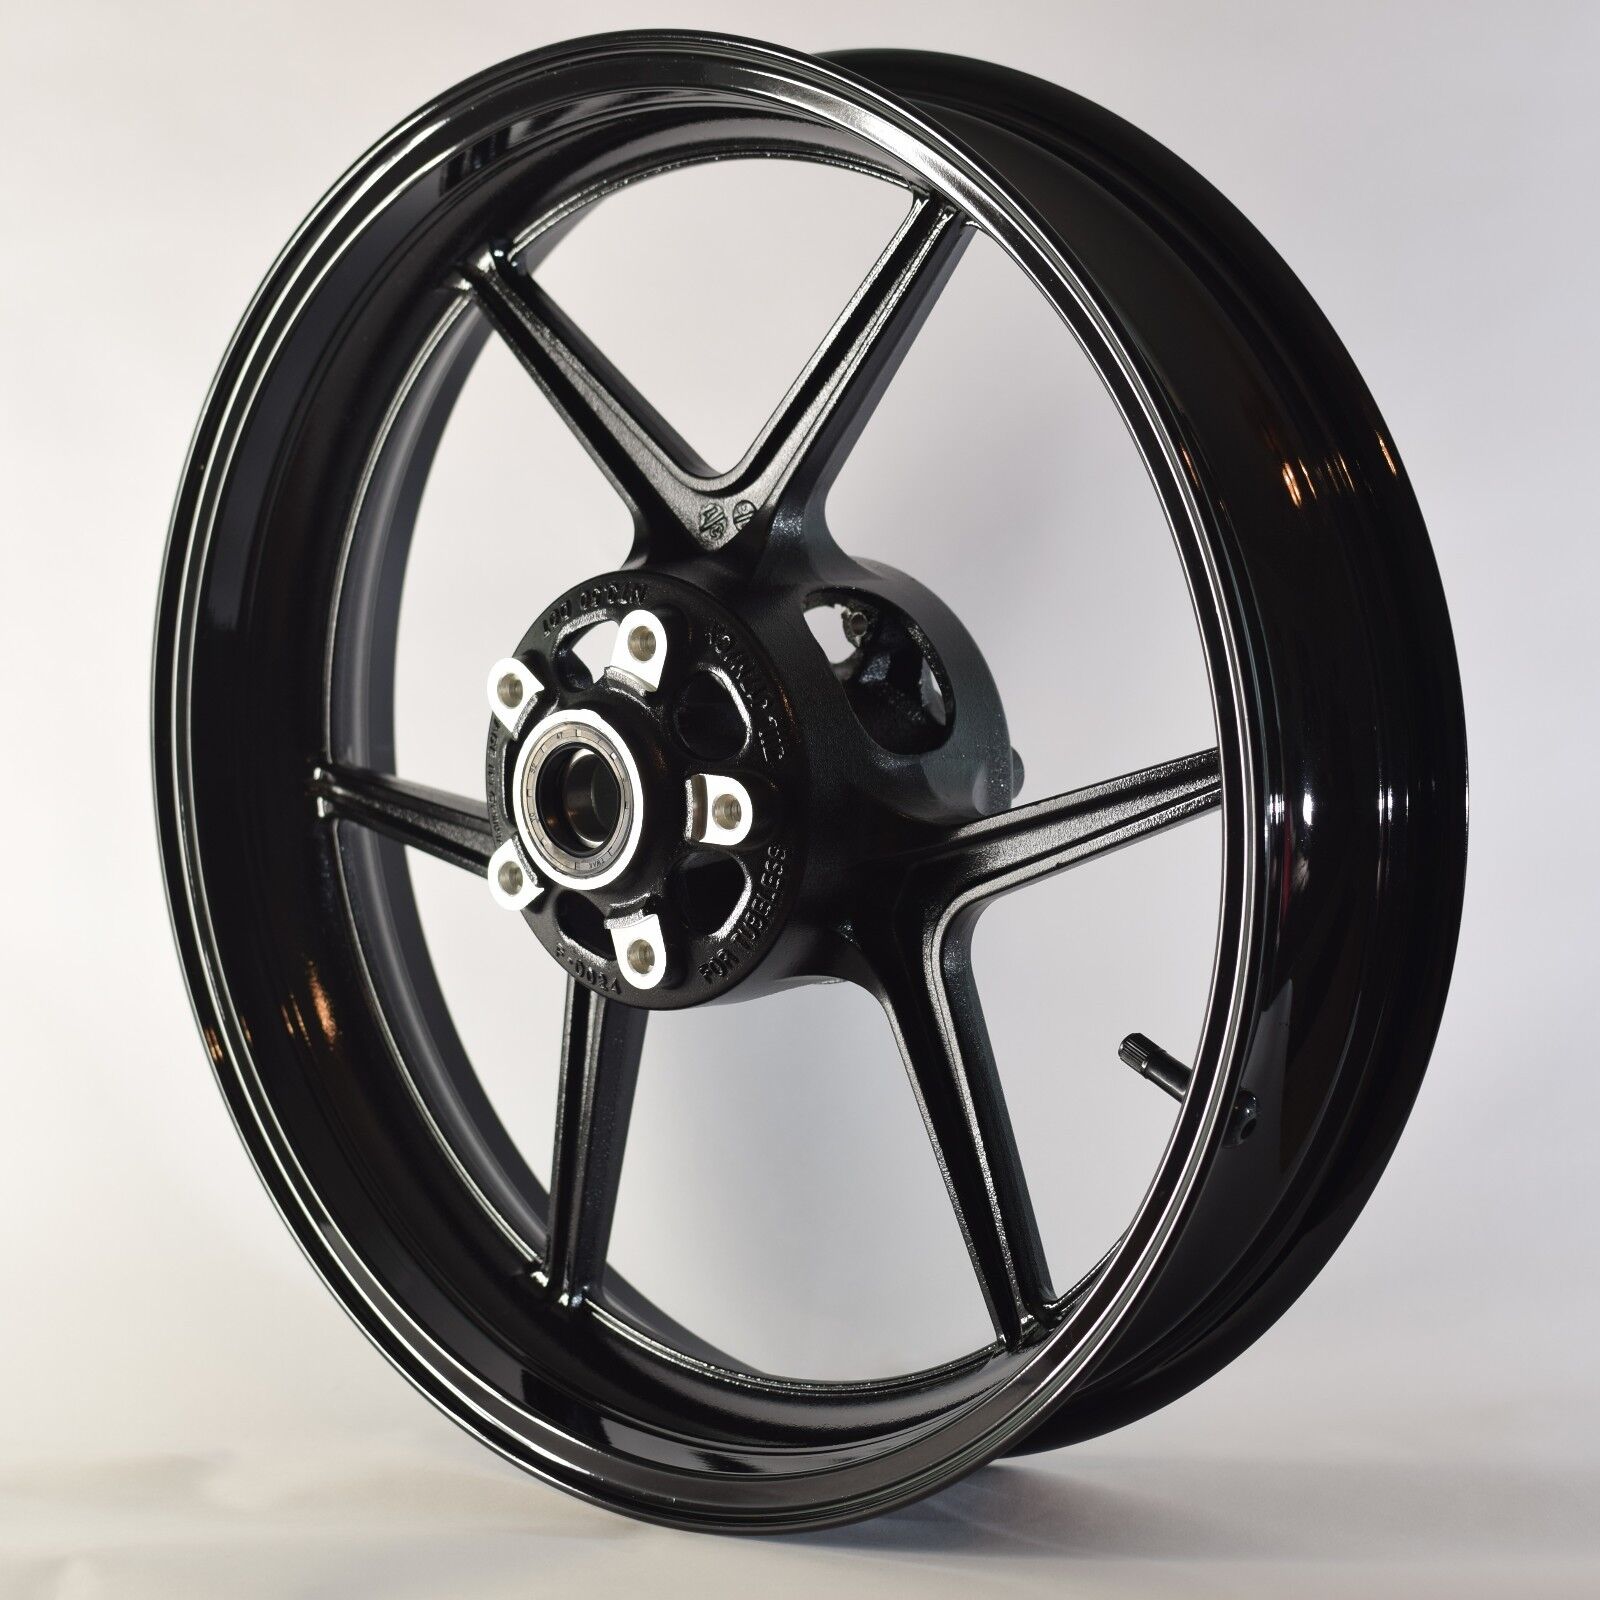 NEW GLOSS BLACK Front Wheel ZX6R 2005-2019 ZX10R 2006-2010 636 R